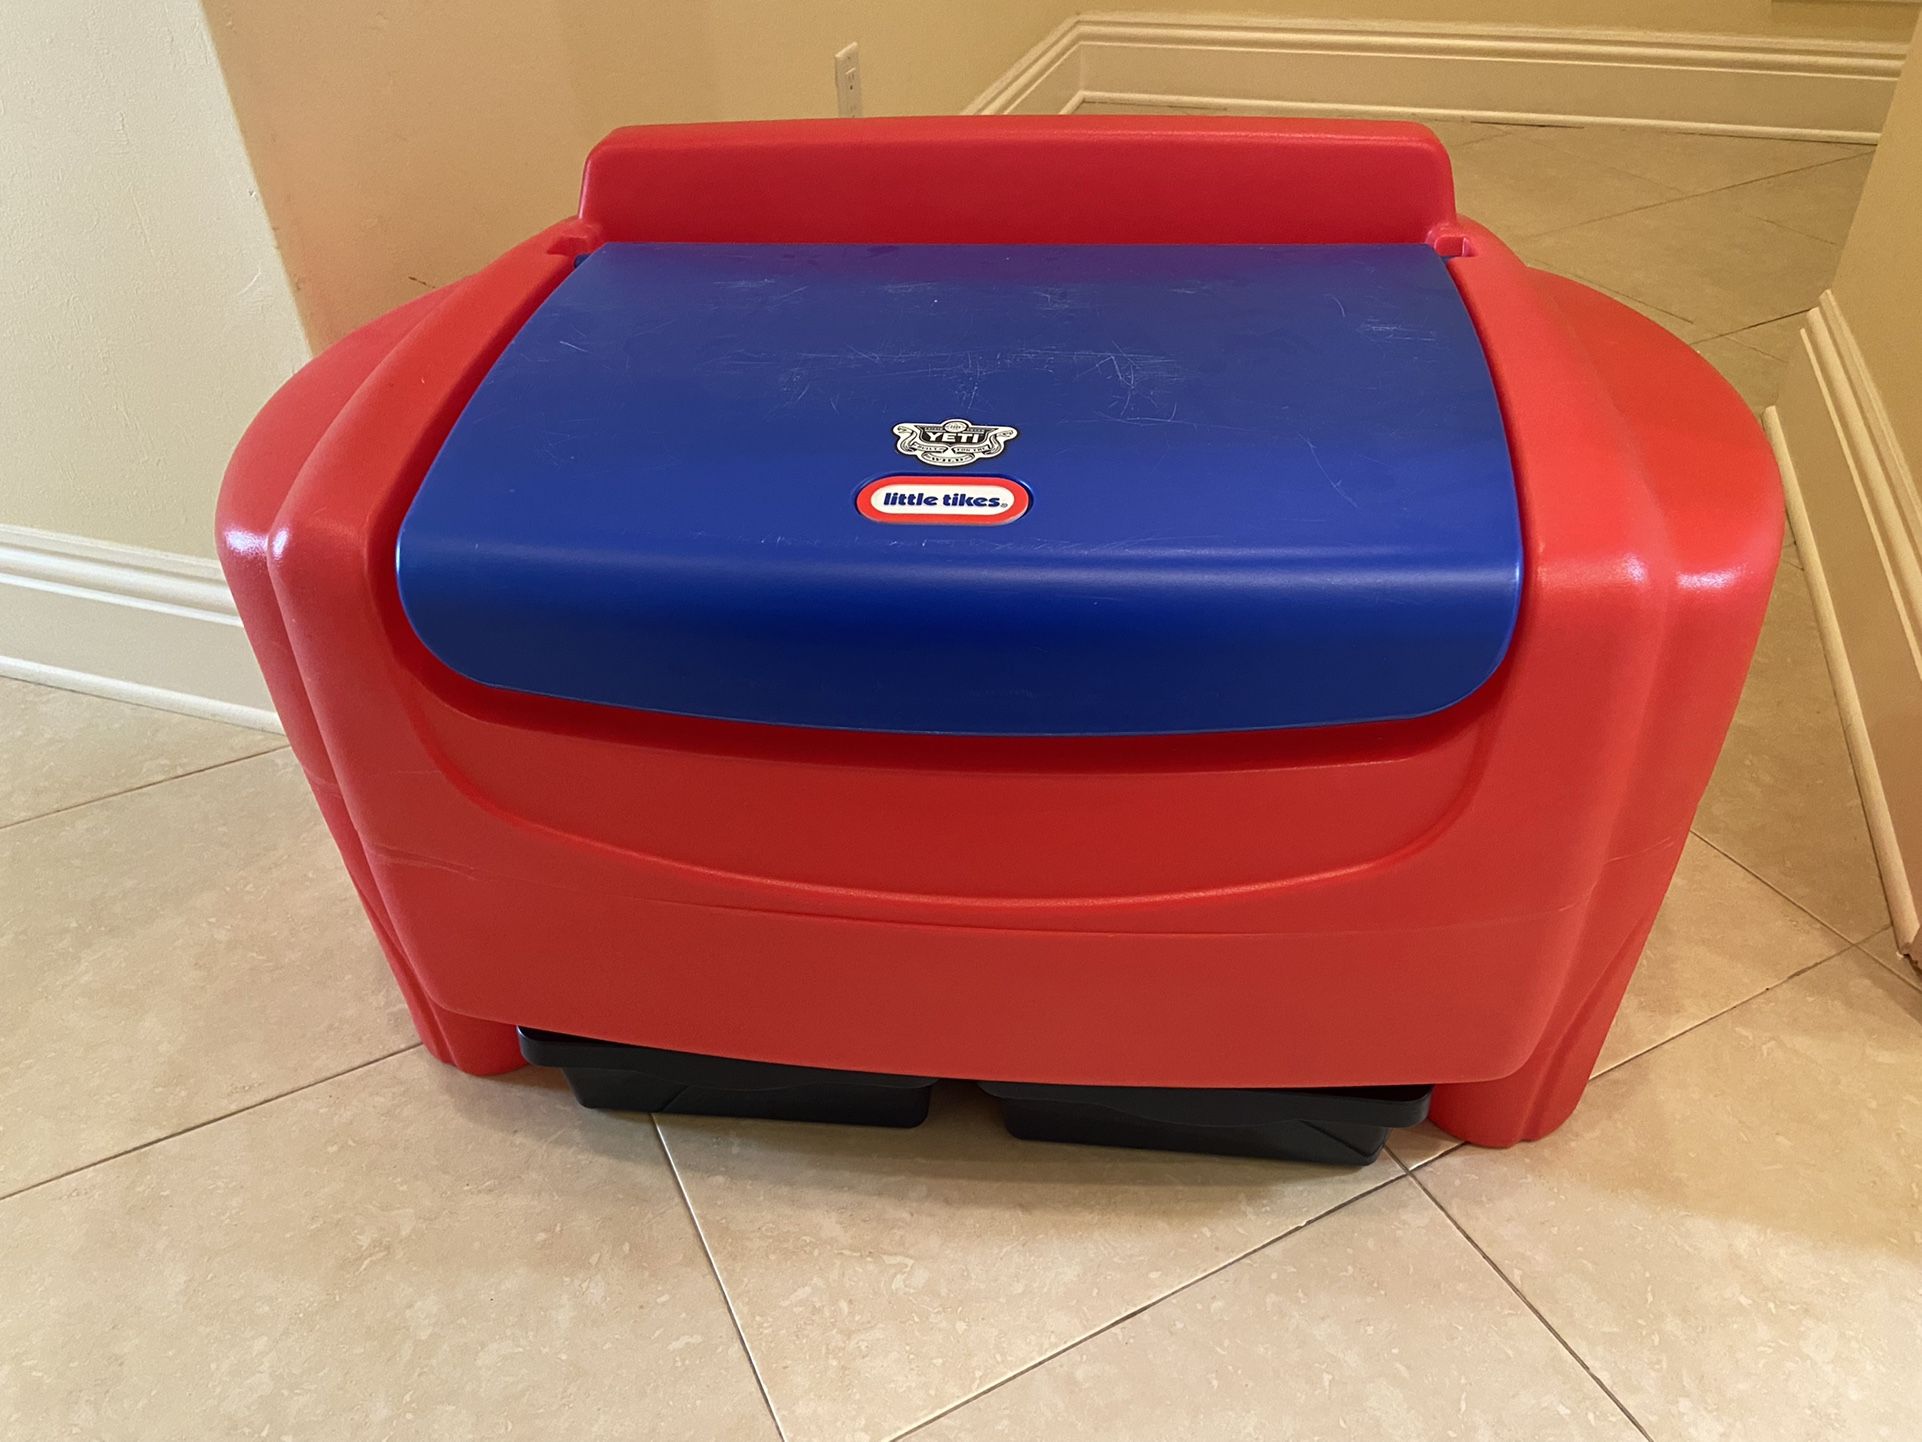 Little Tikes Sort N’ Store Toy Chest! Like New!